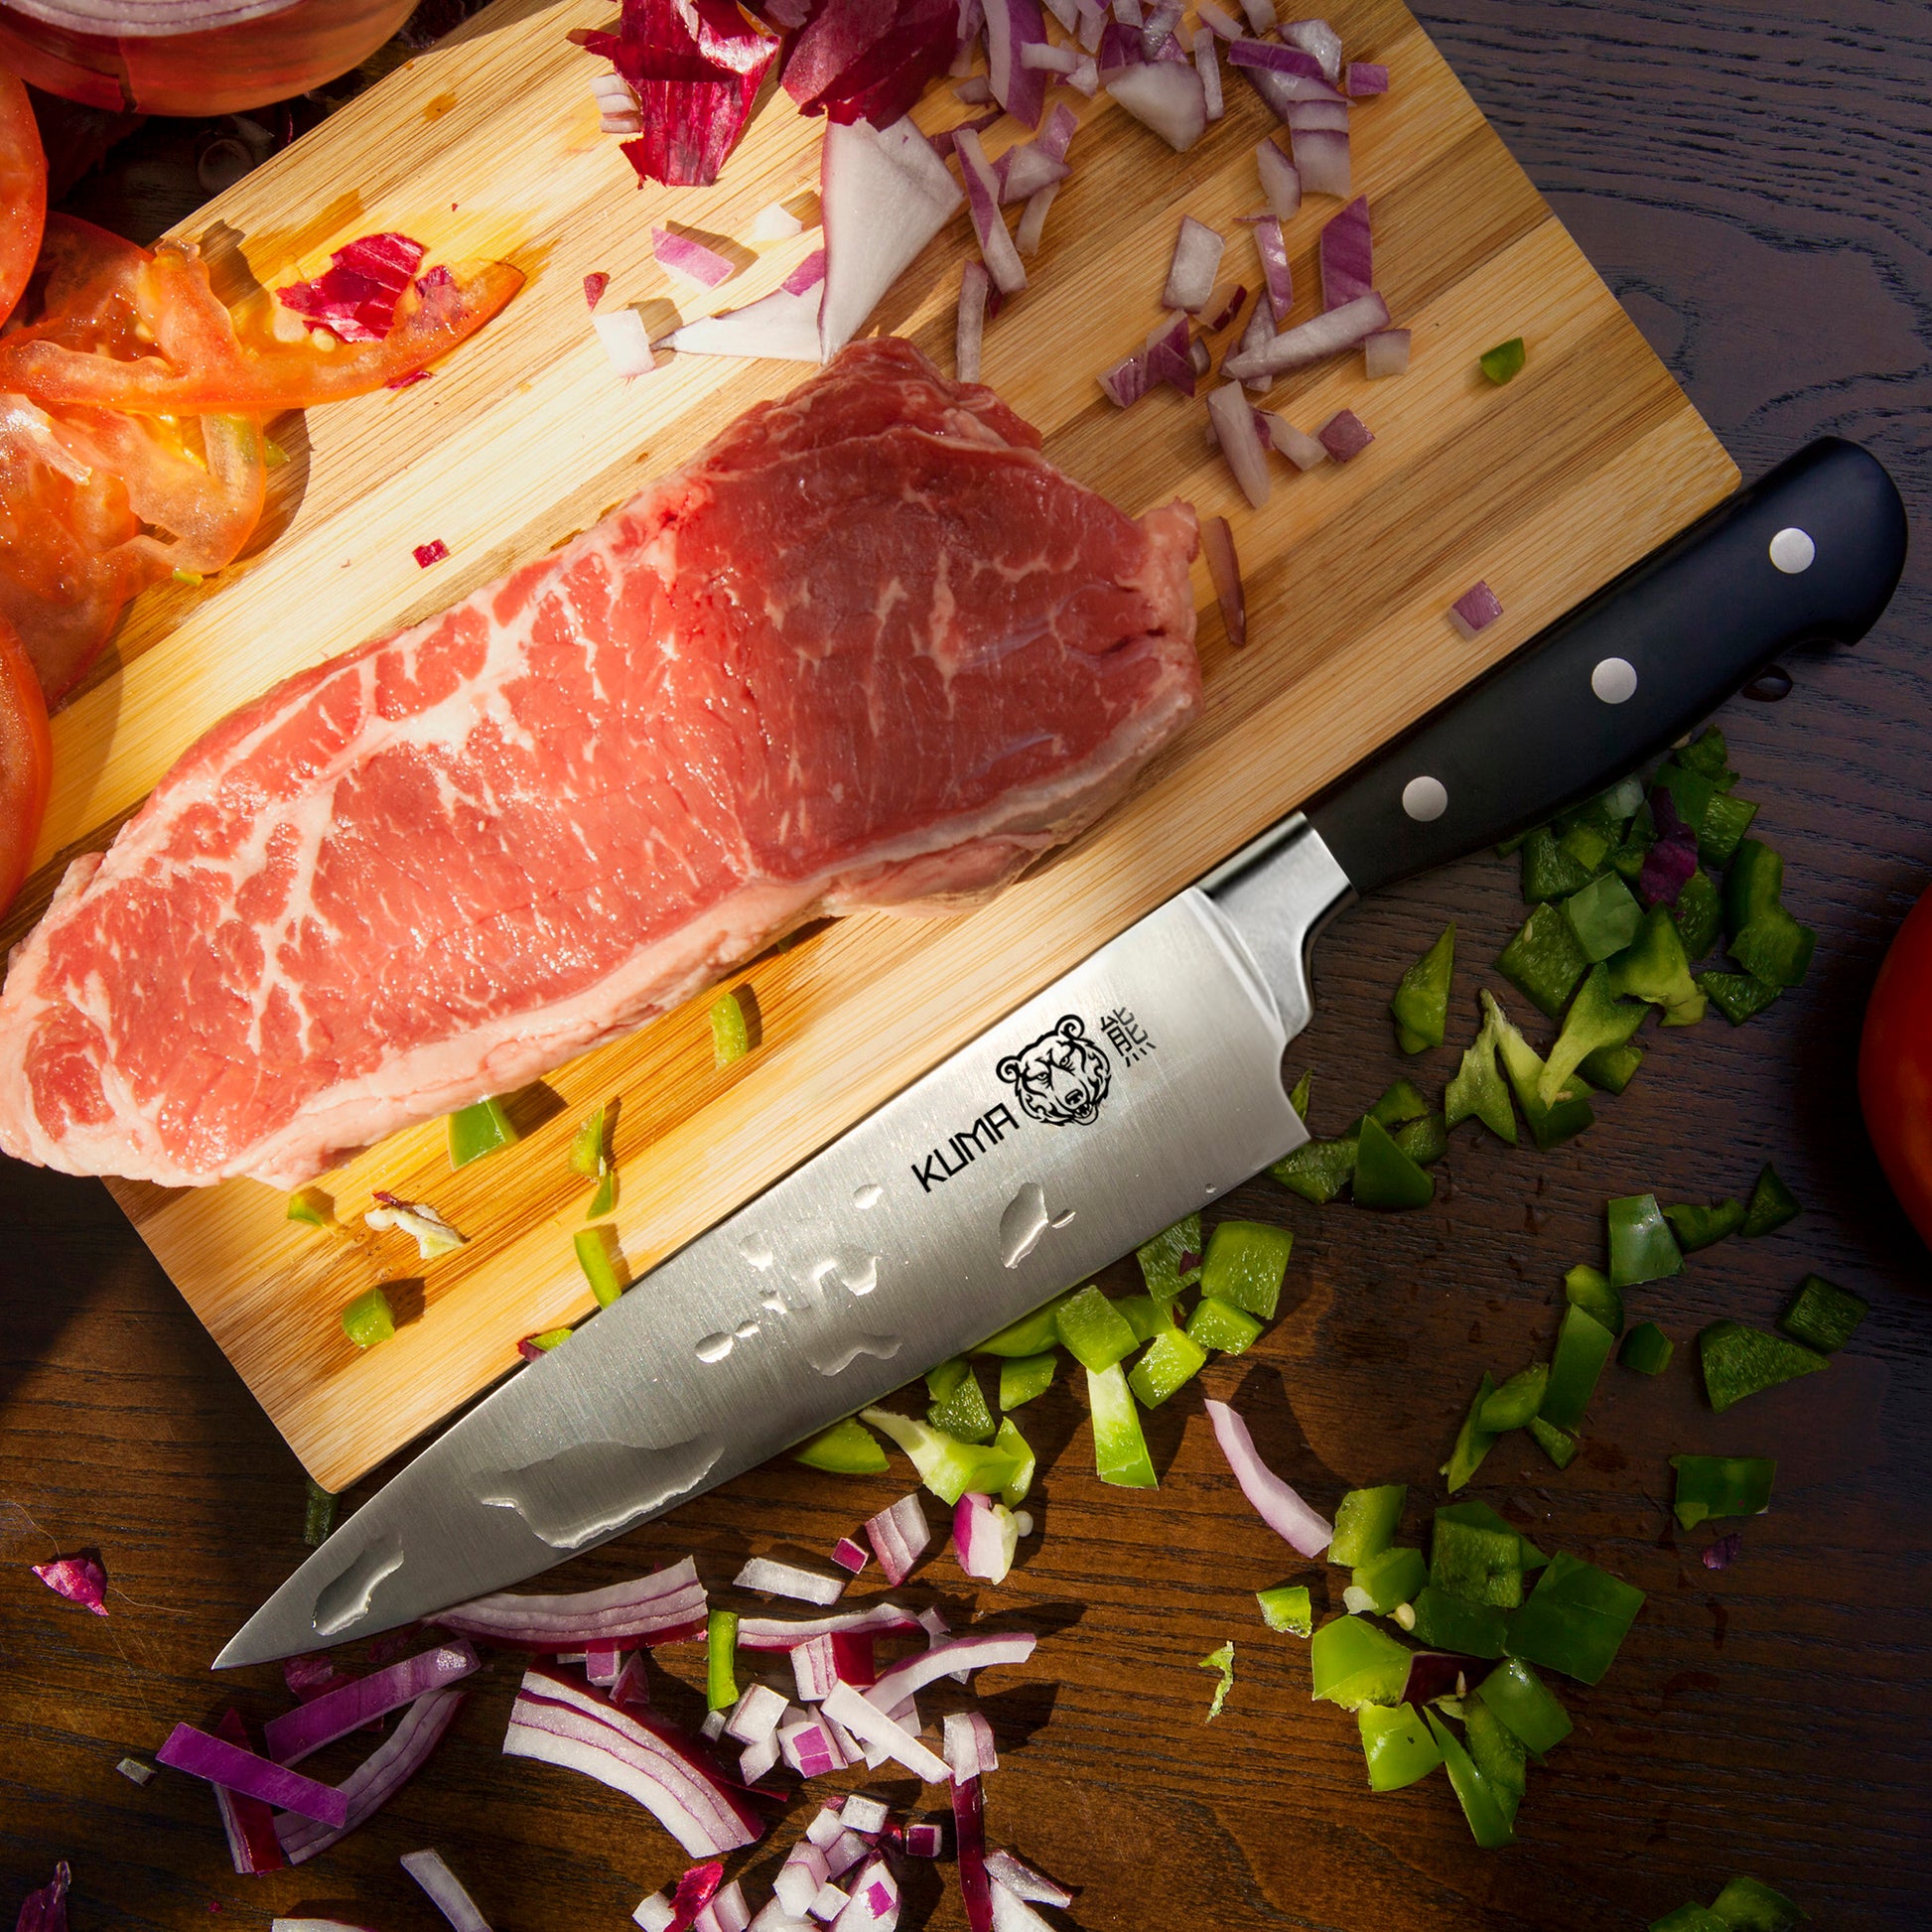 KUMA Multipurpose Chef Knife - 8 Inch Professional Sharp knife - Kitchen  knife For Cutting, Chopping and Dicing With Incomparable Ergonomic Grip